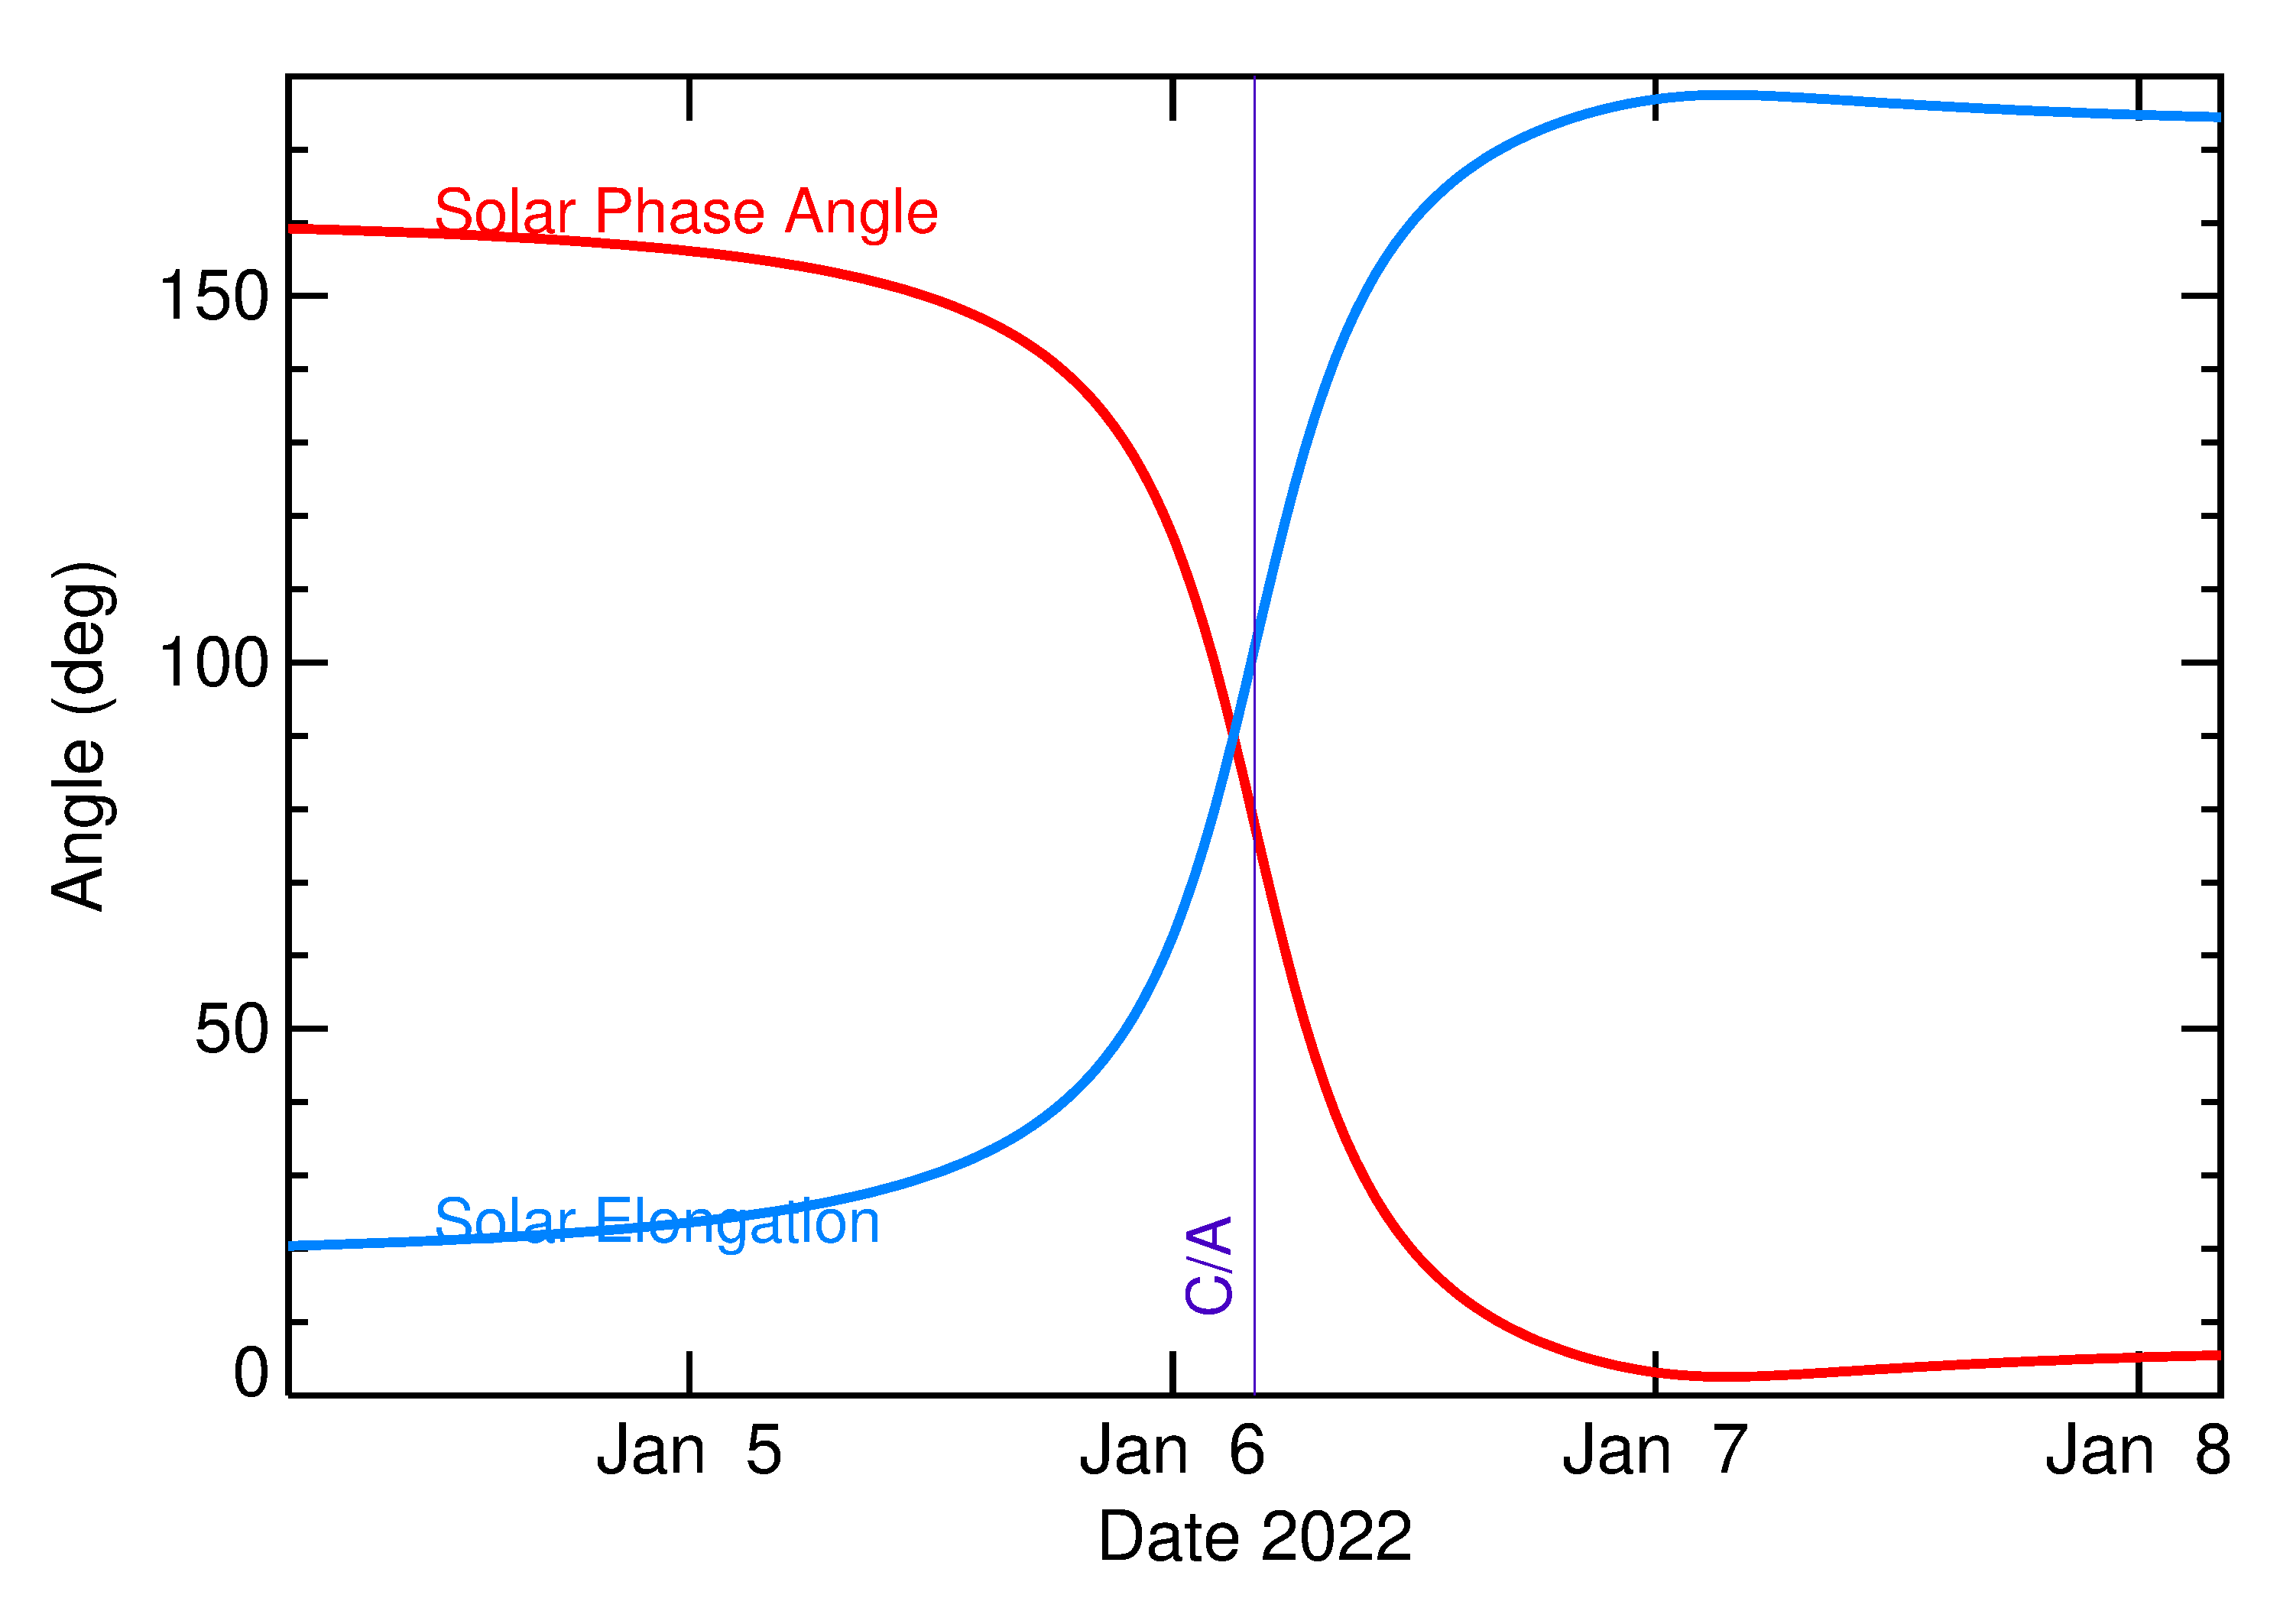 Solar Elongation and Solar Phase Angle of 2022 AY4 in the days around closest approach